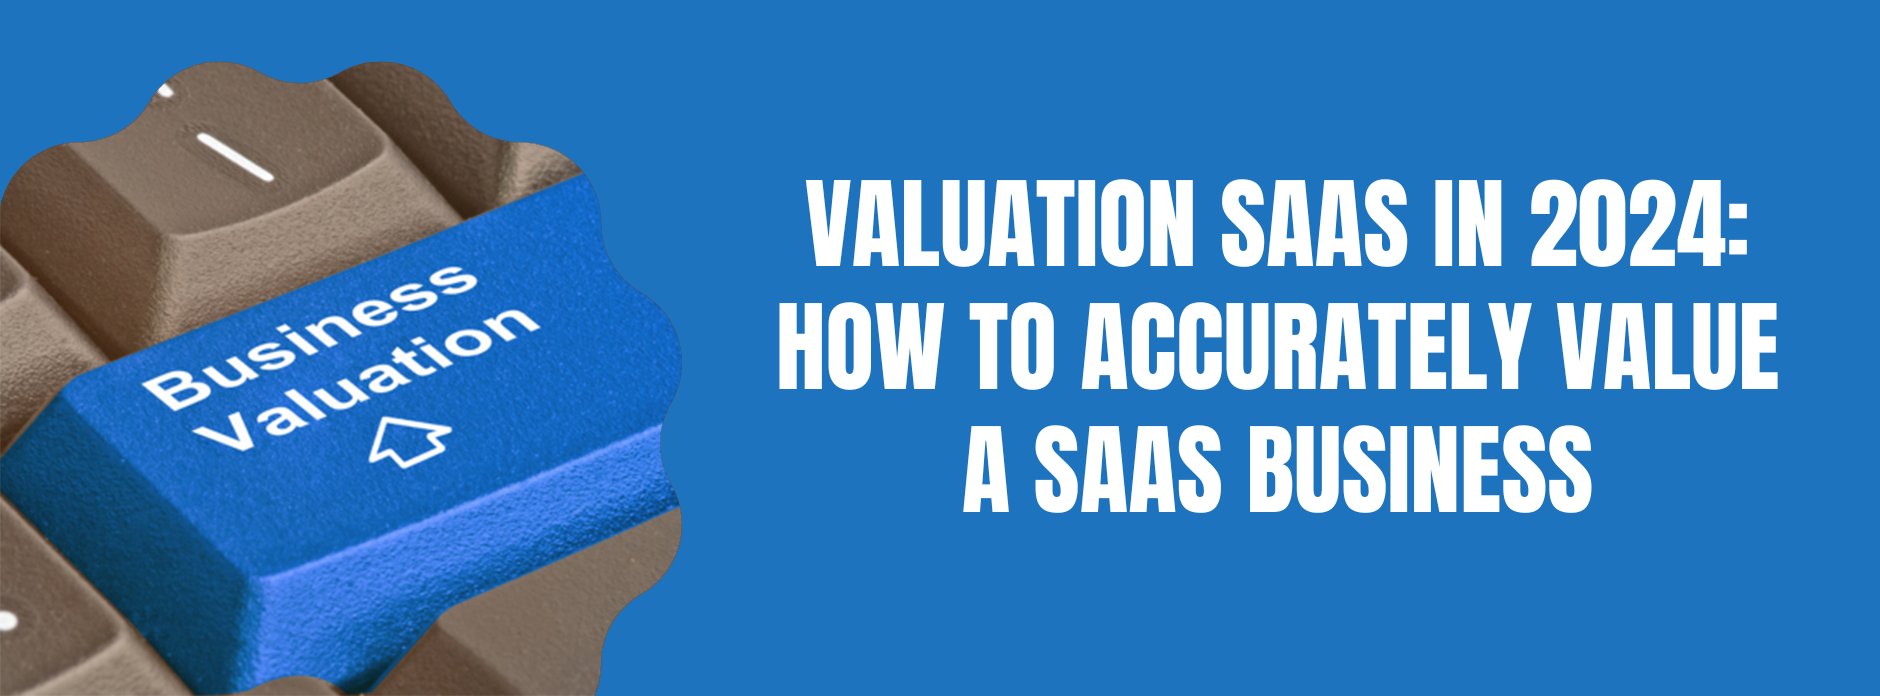 Valuation SaaS in 2024: How to Accurately Value a SaaS Business